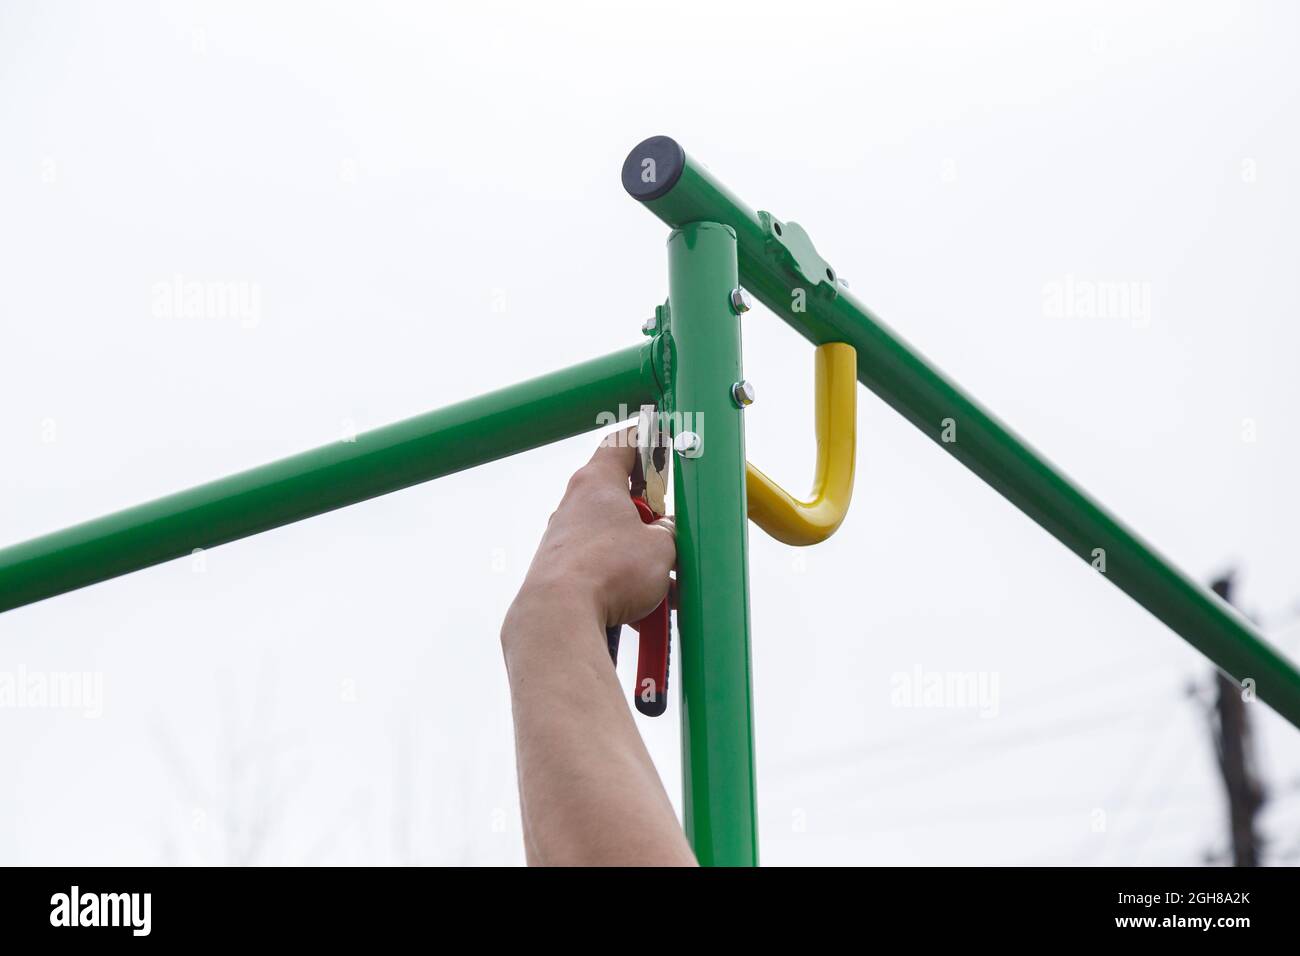 Image of playground installation in cloudy day Stock Photo